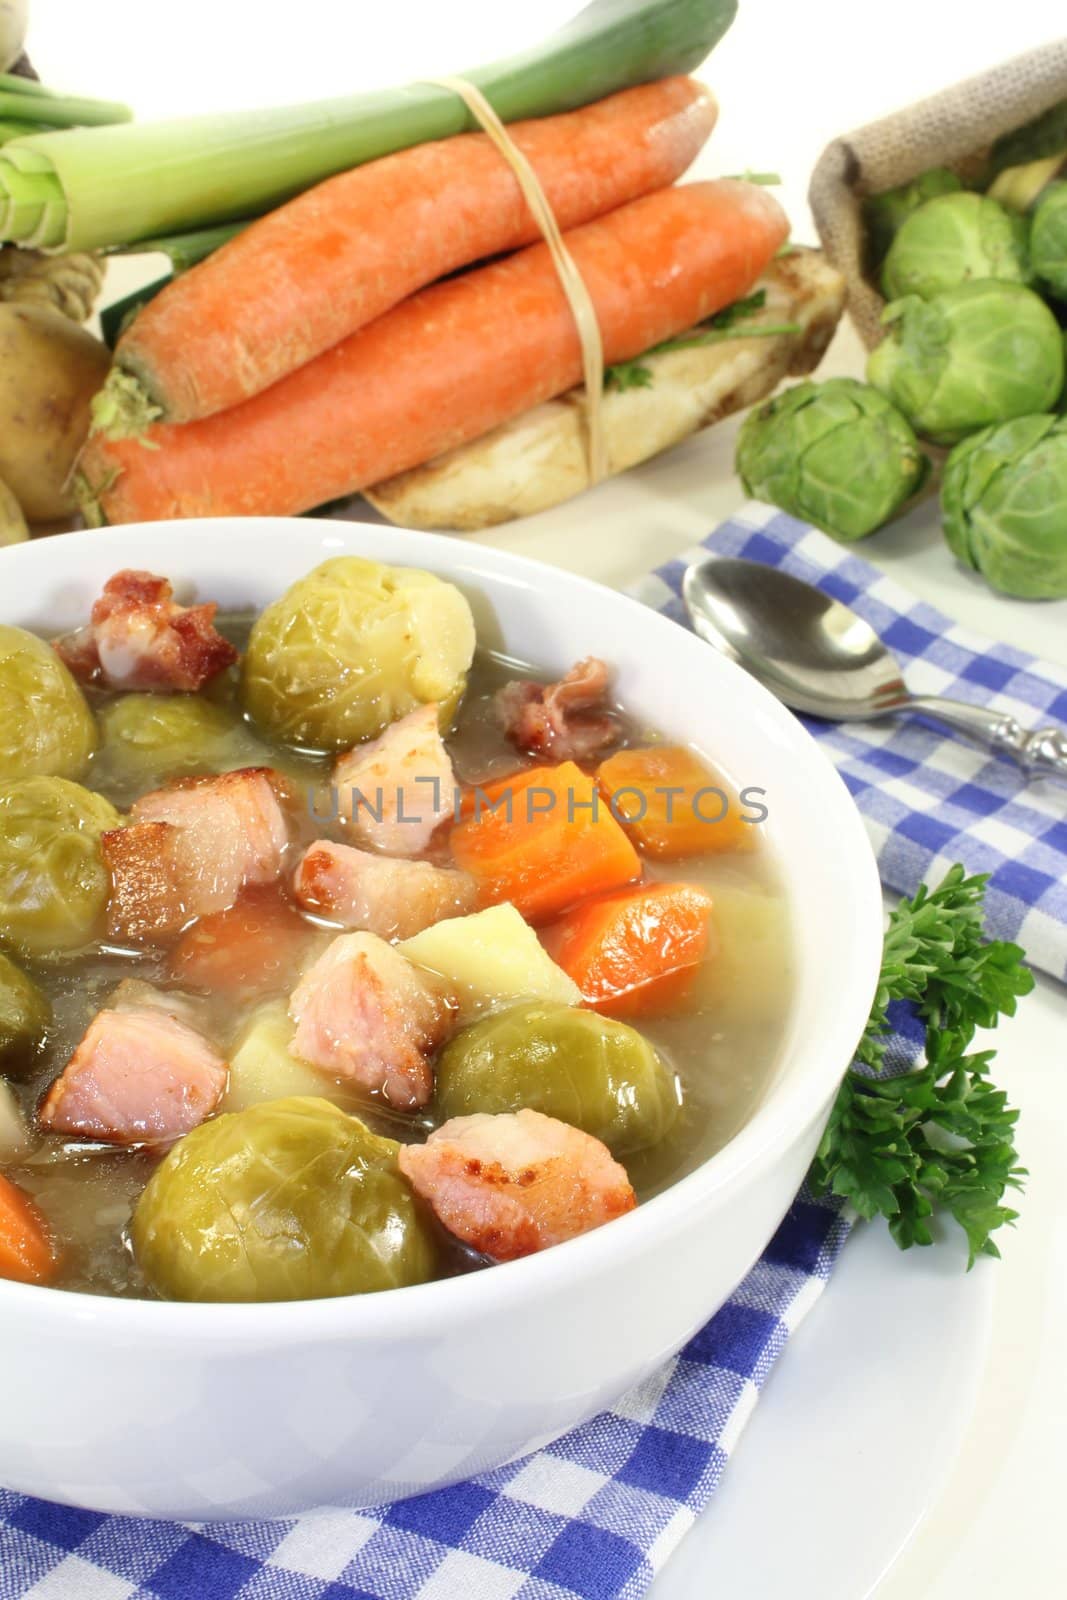 Brussels sprouts stew by silencefoto